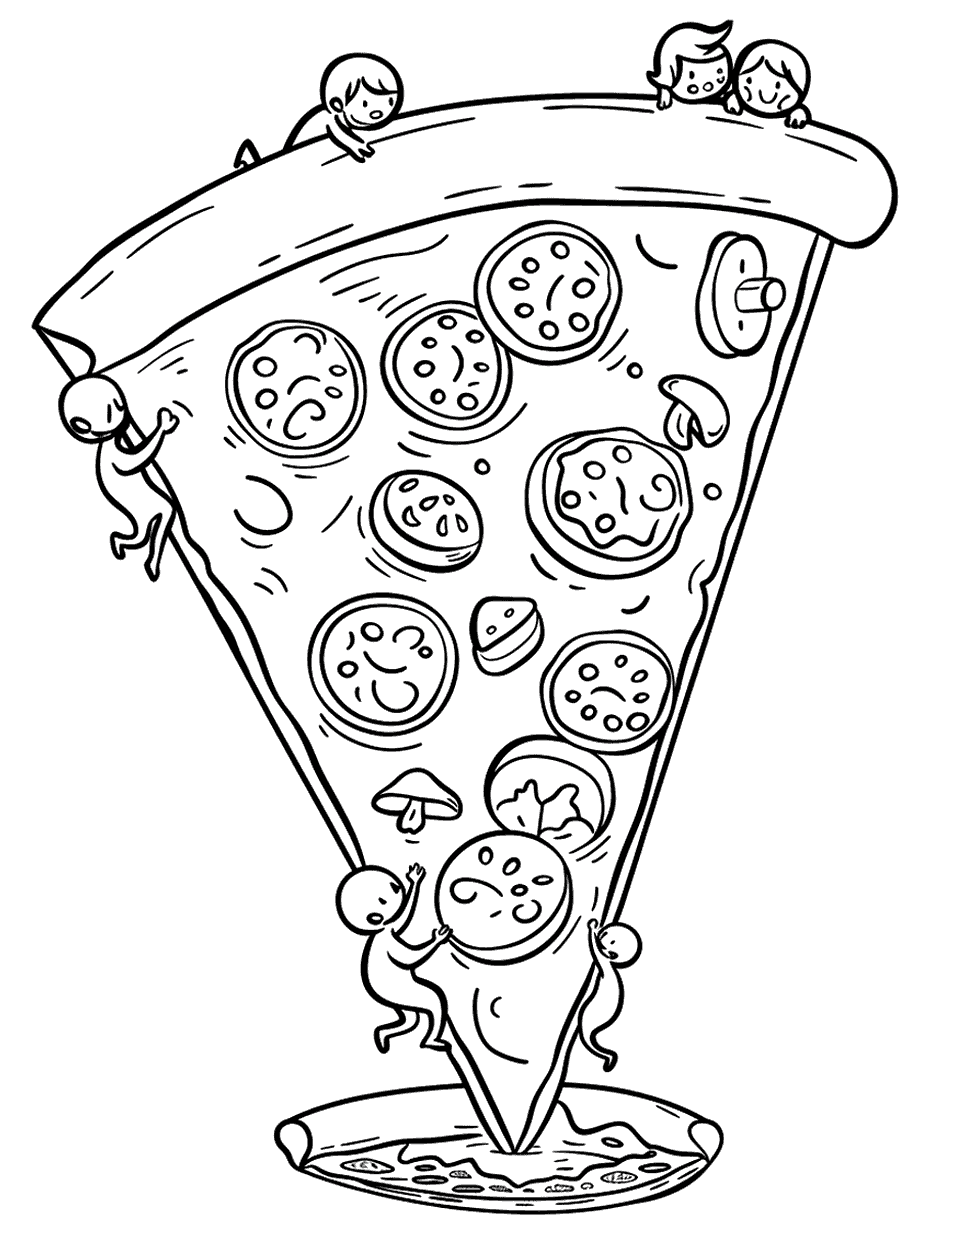 Pizza Slice Slide Coloring Page - Kids hanging onto a giant pizza slice.